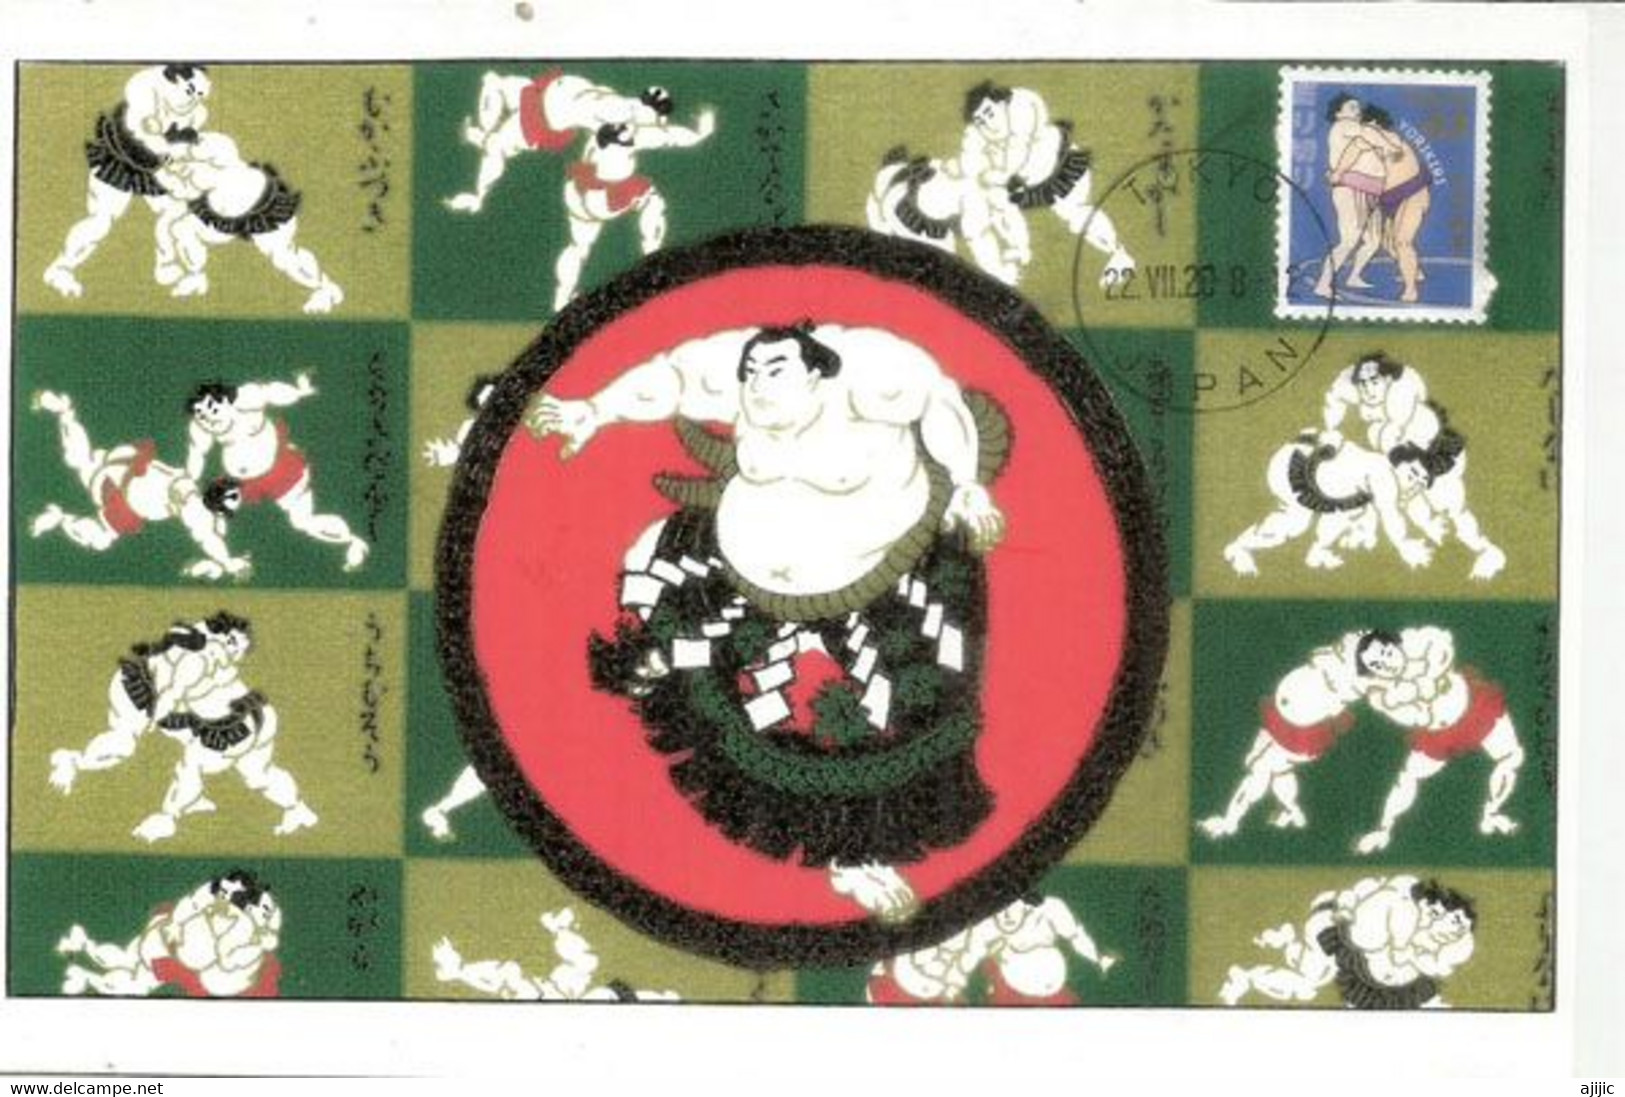 Sumo Granted Full Recognition As Olympic Sport By IOC.(RARE-SCARCE MAXIMUM-CARD FROM TOKYO) 2020 - Verano 2020 : Tokio